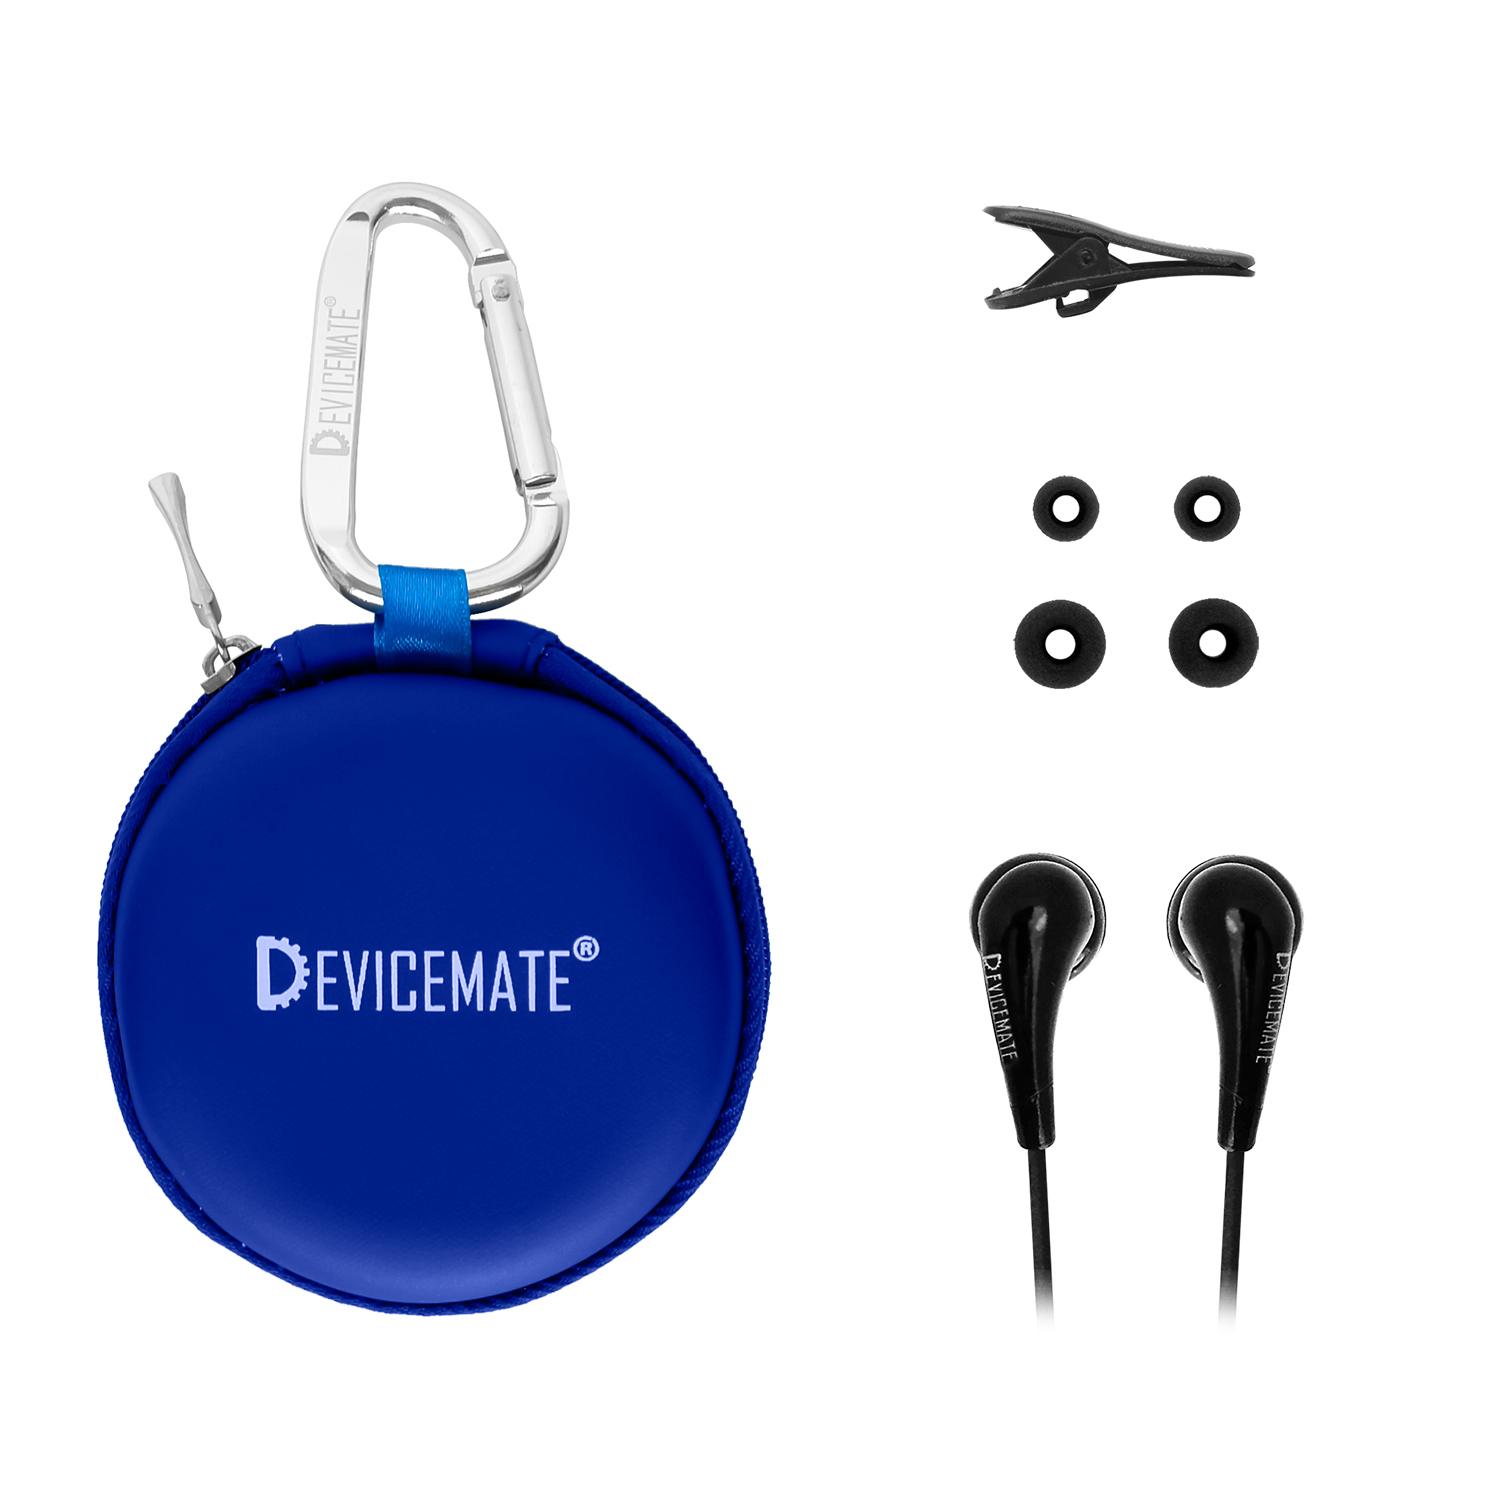 DEVICEMATE® SD 255-CTB In-Ear Stereo Earphones[Cobalt Blue] Case